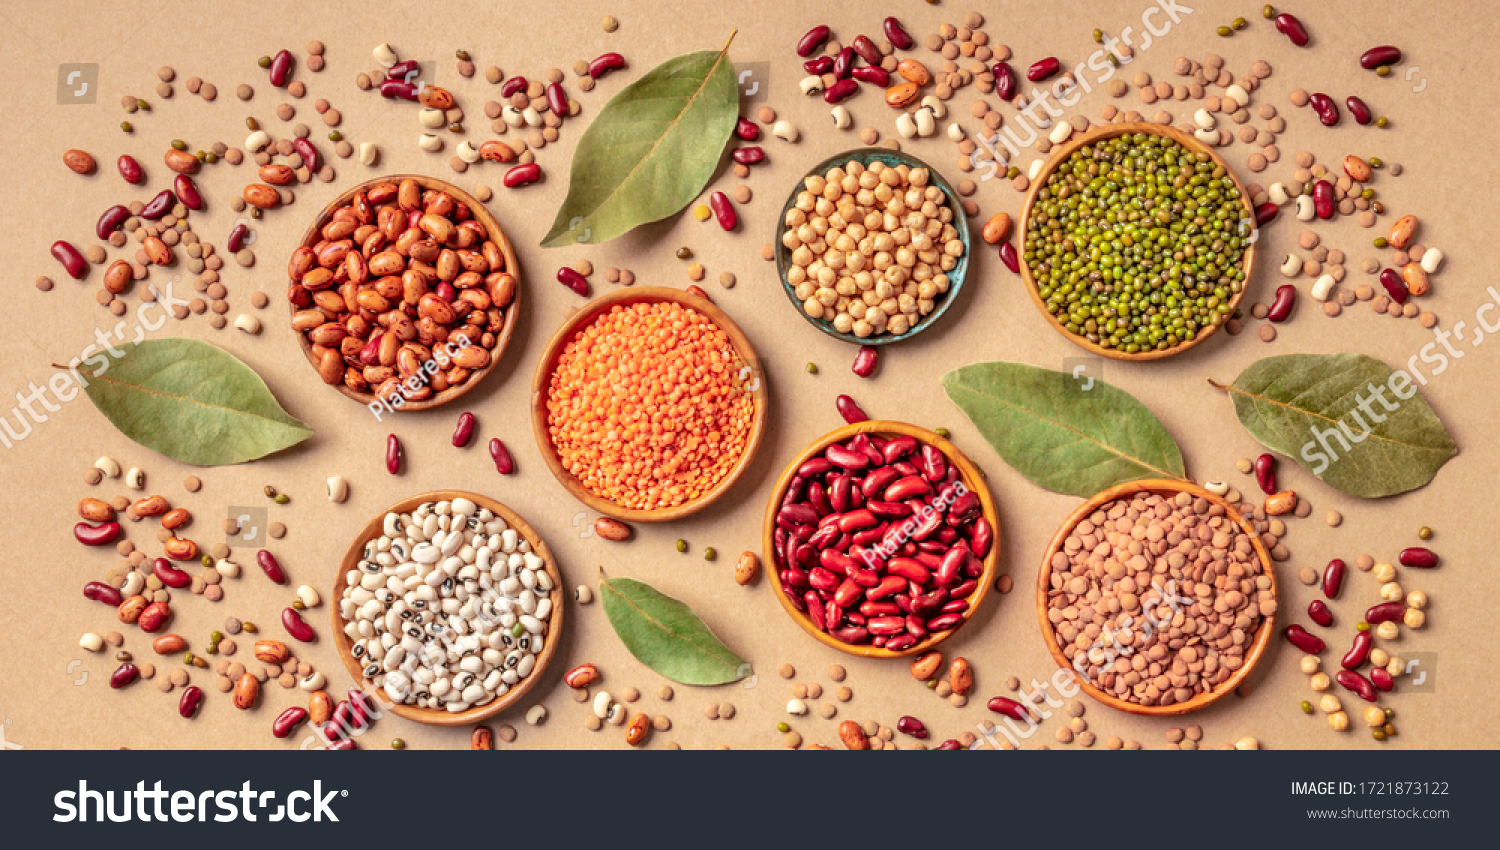 Legumes assortment, overhead panoramic shot on a brown background. Lentils, soybeans, chickpeas, red kidney beans, black-eyed peas, a vatiety of pulses #1721873122